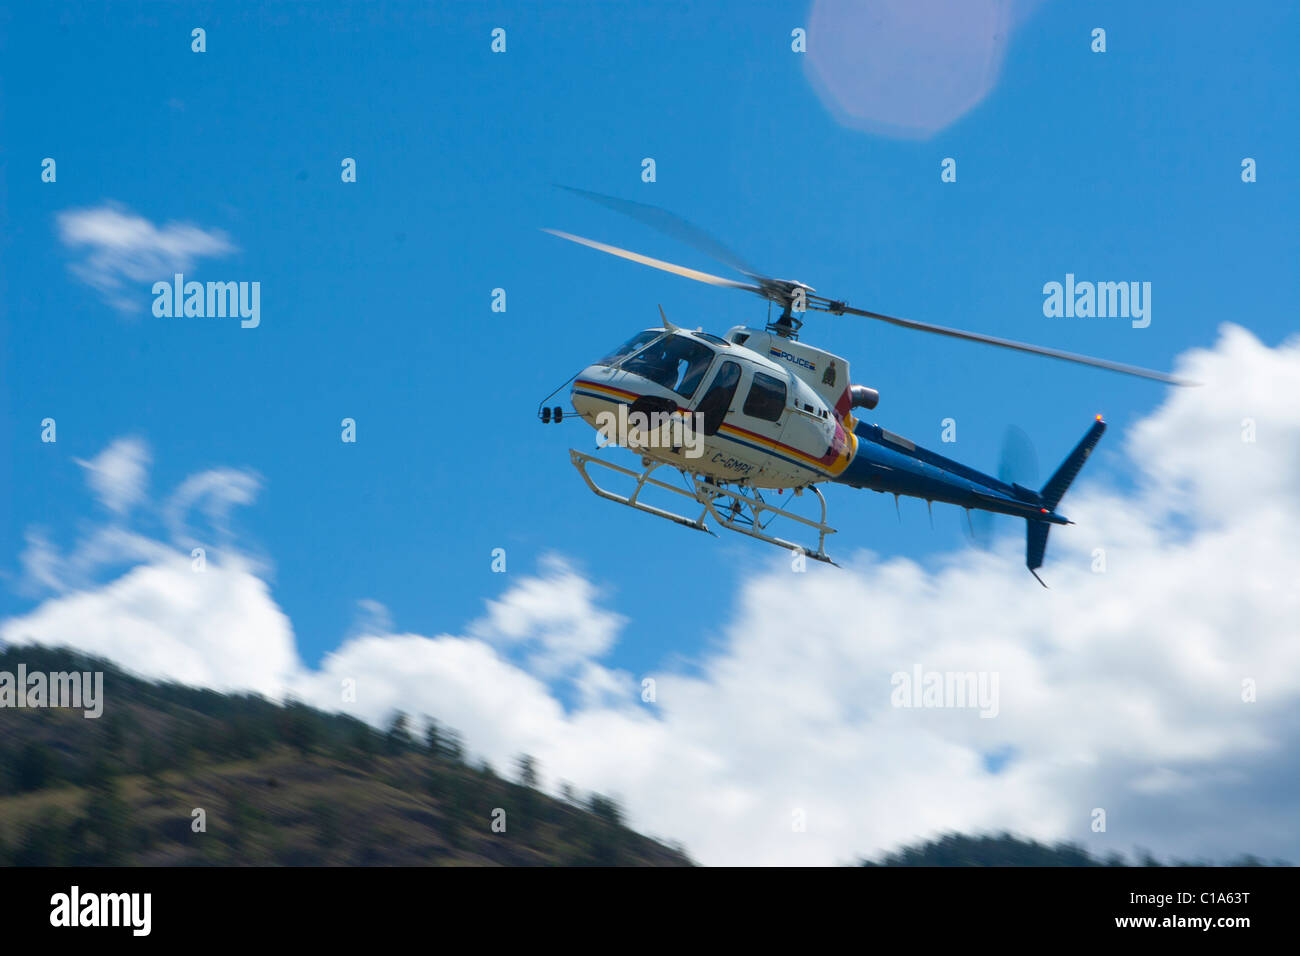 Royal Canadian Mounted Police (RCMP) Eurocopter AS 350B3 Ecureuil (Squirrel) also known as an Astar. Kelowna BC, Canada Stock Photo